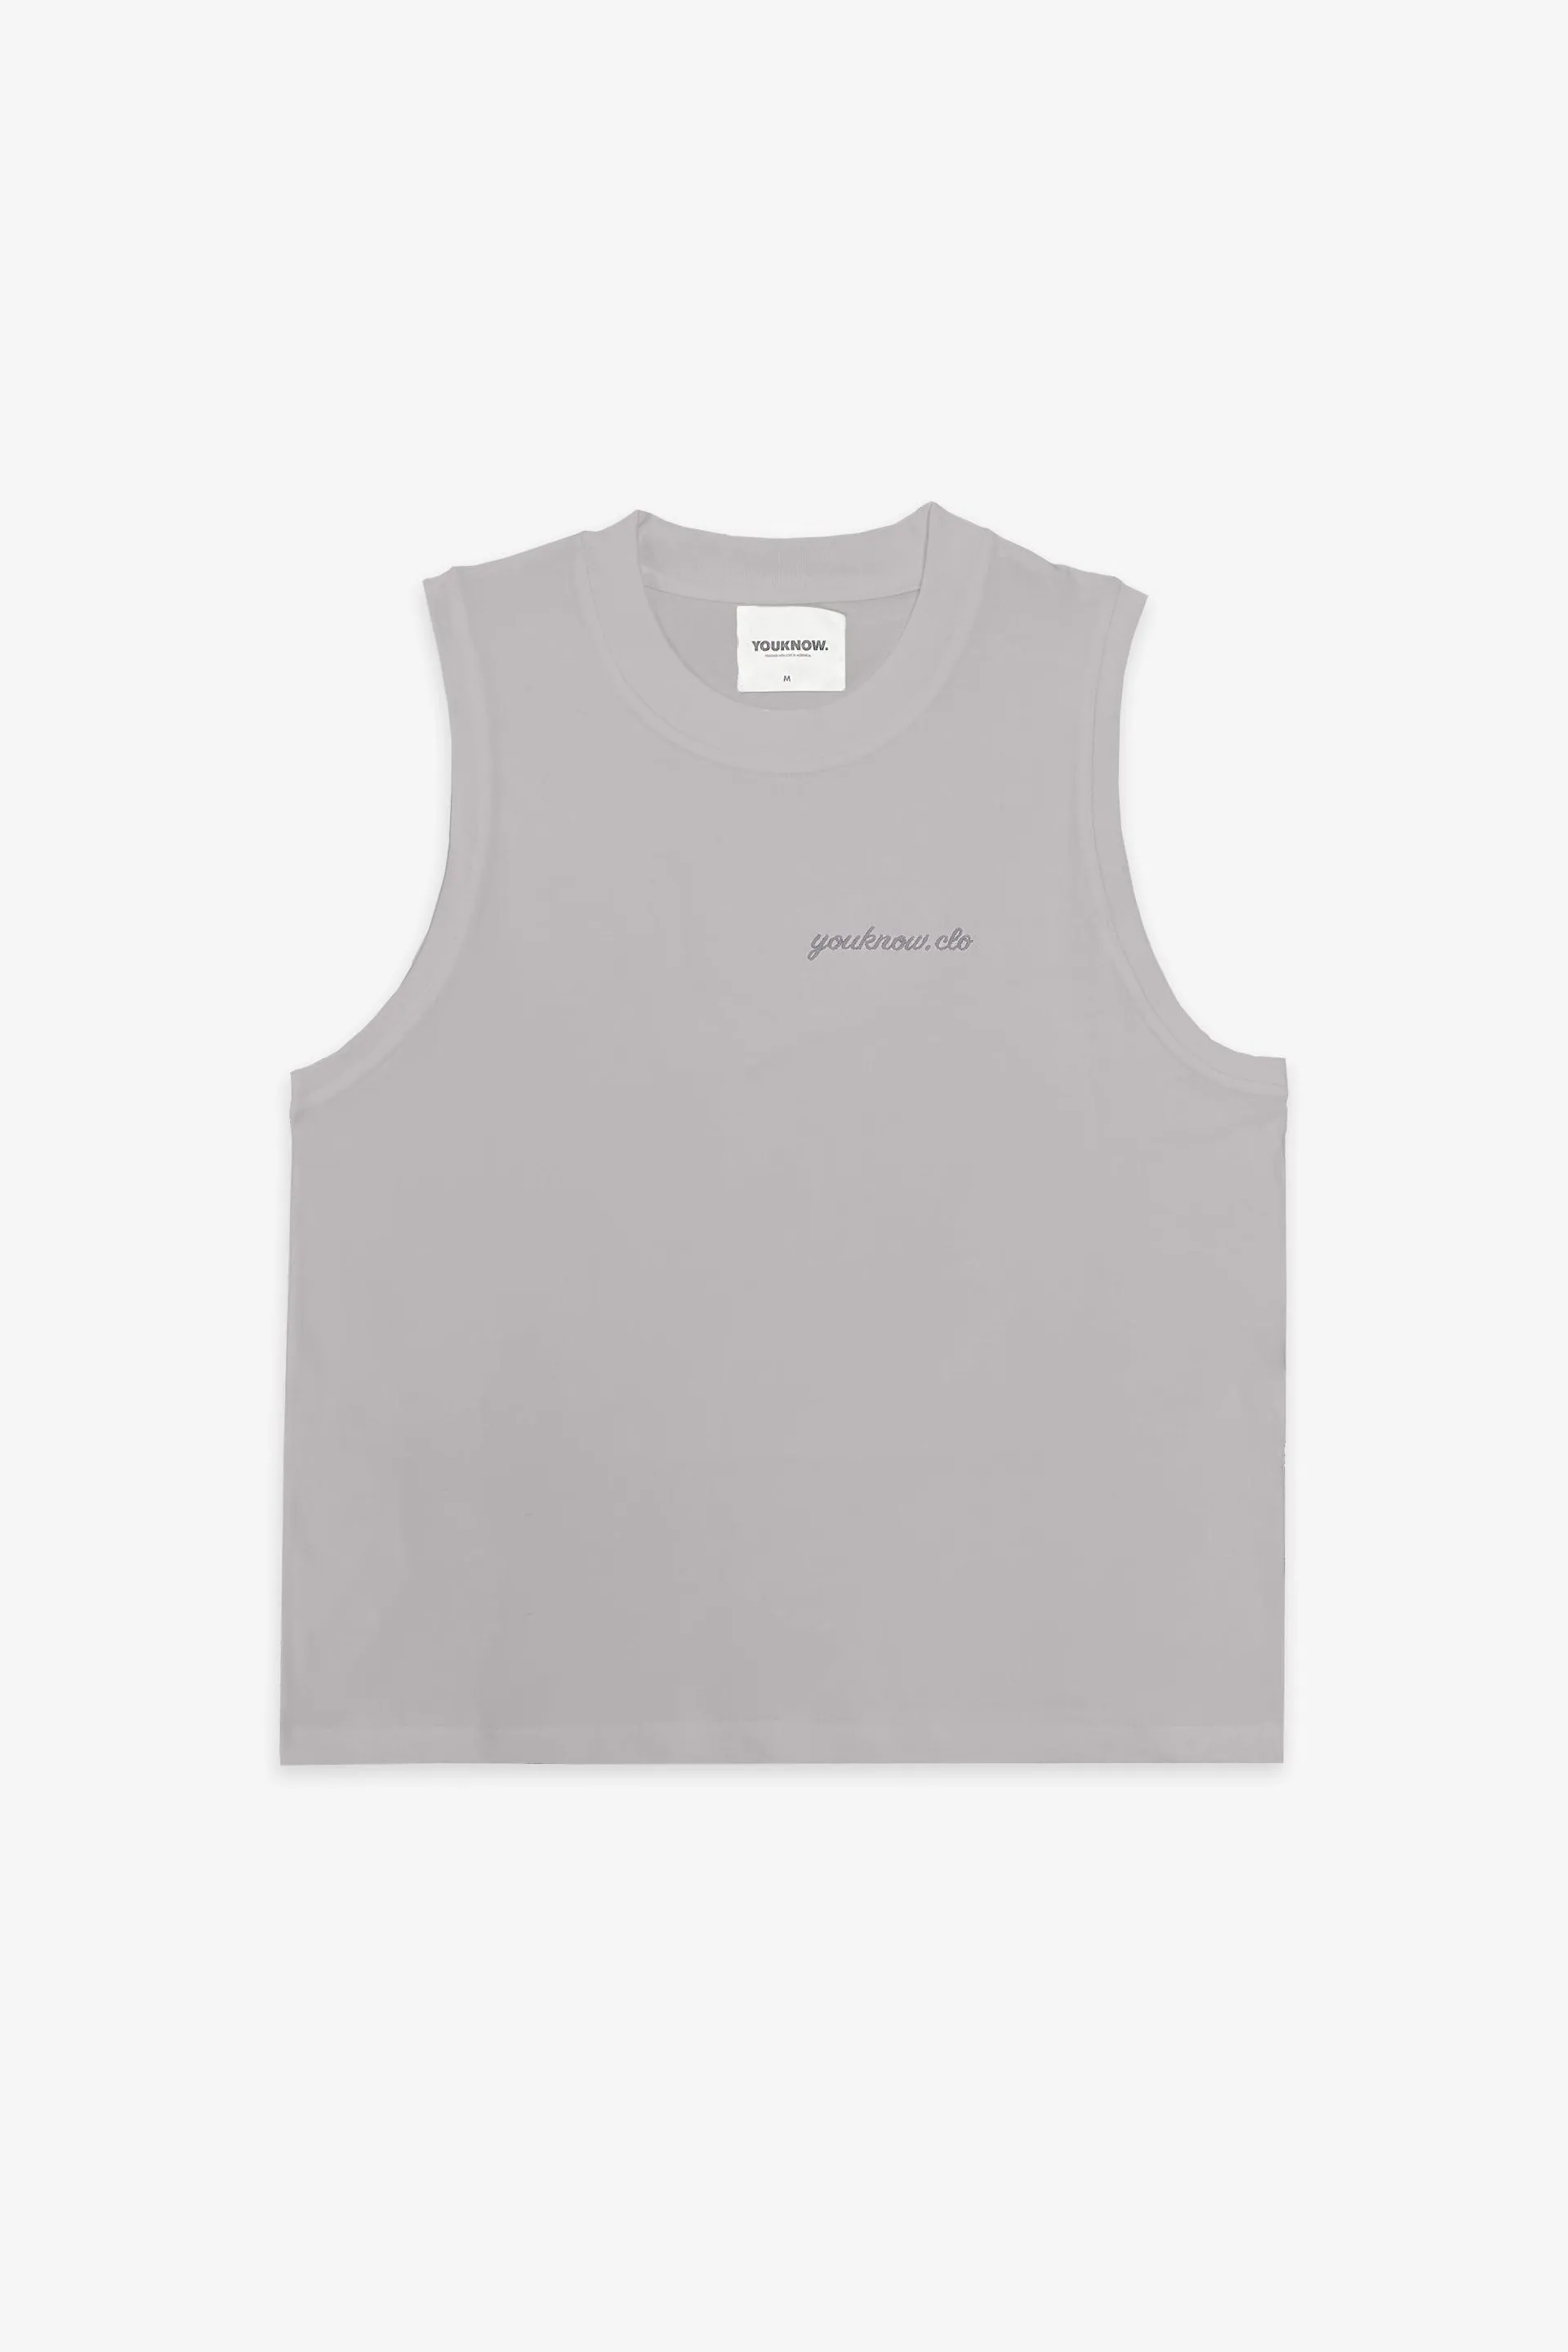 STRUCTURED SINGLET - DOVE GREY